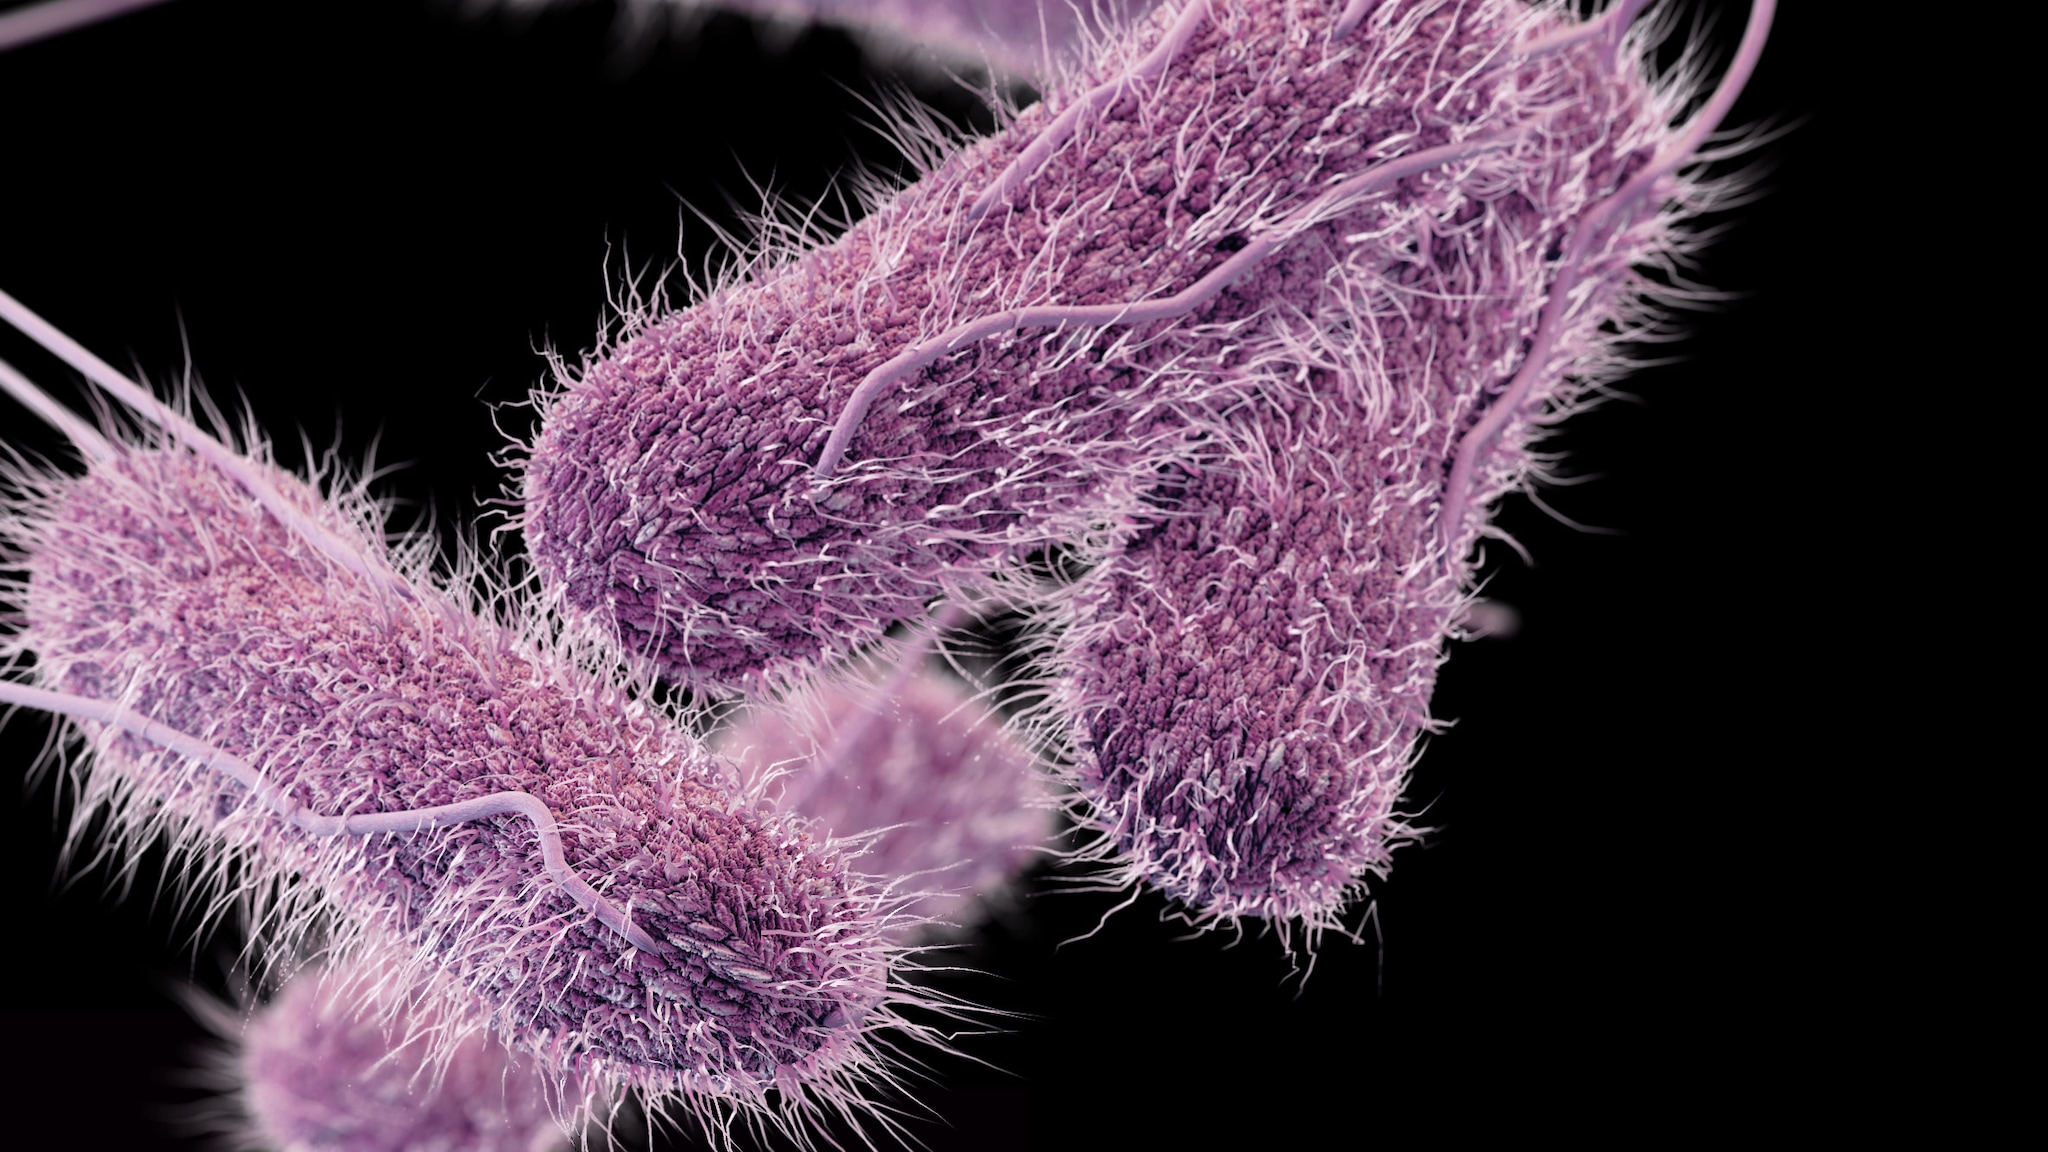 An illustration of what Salmonella looks like under a microscope.